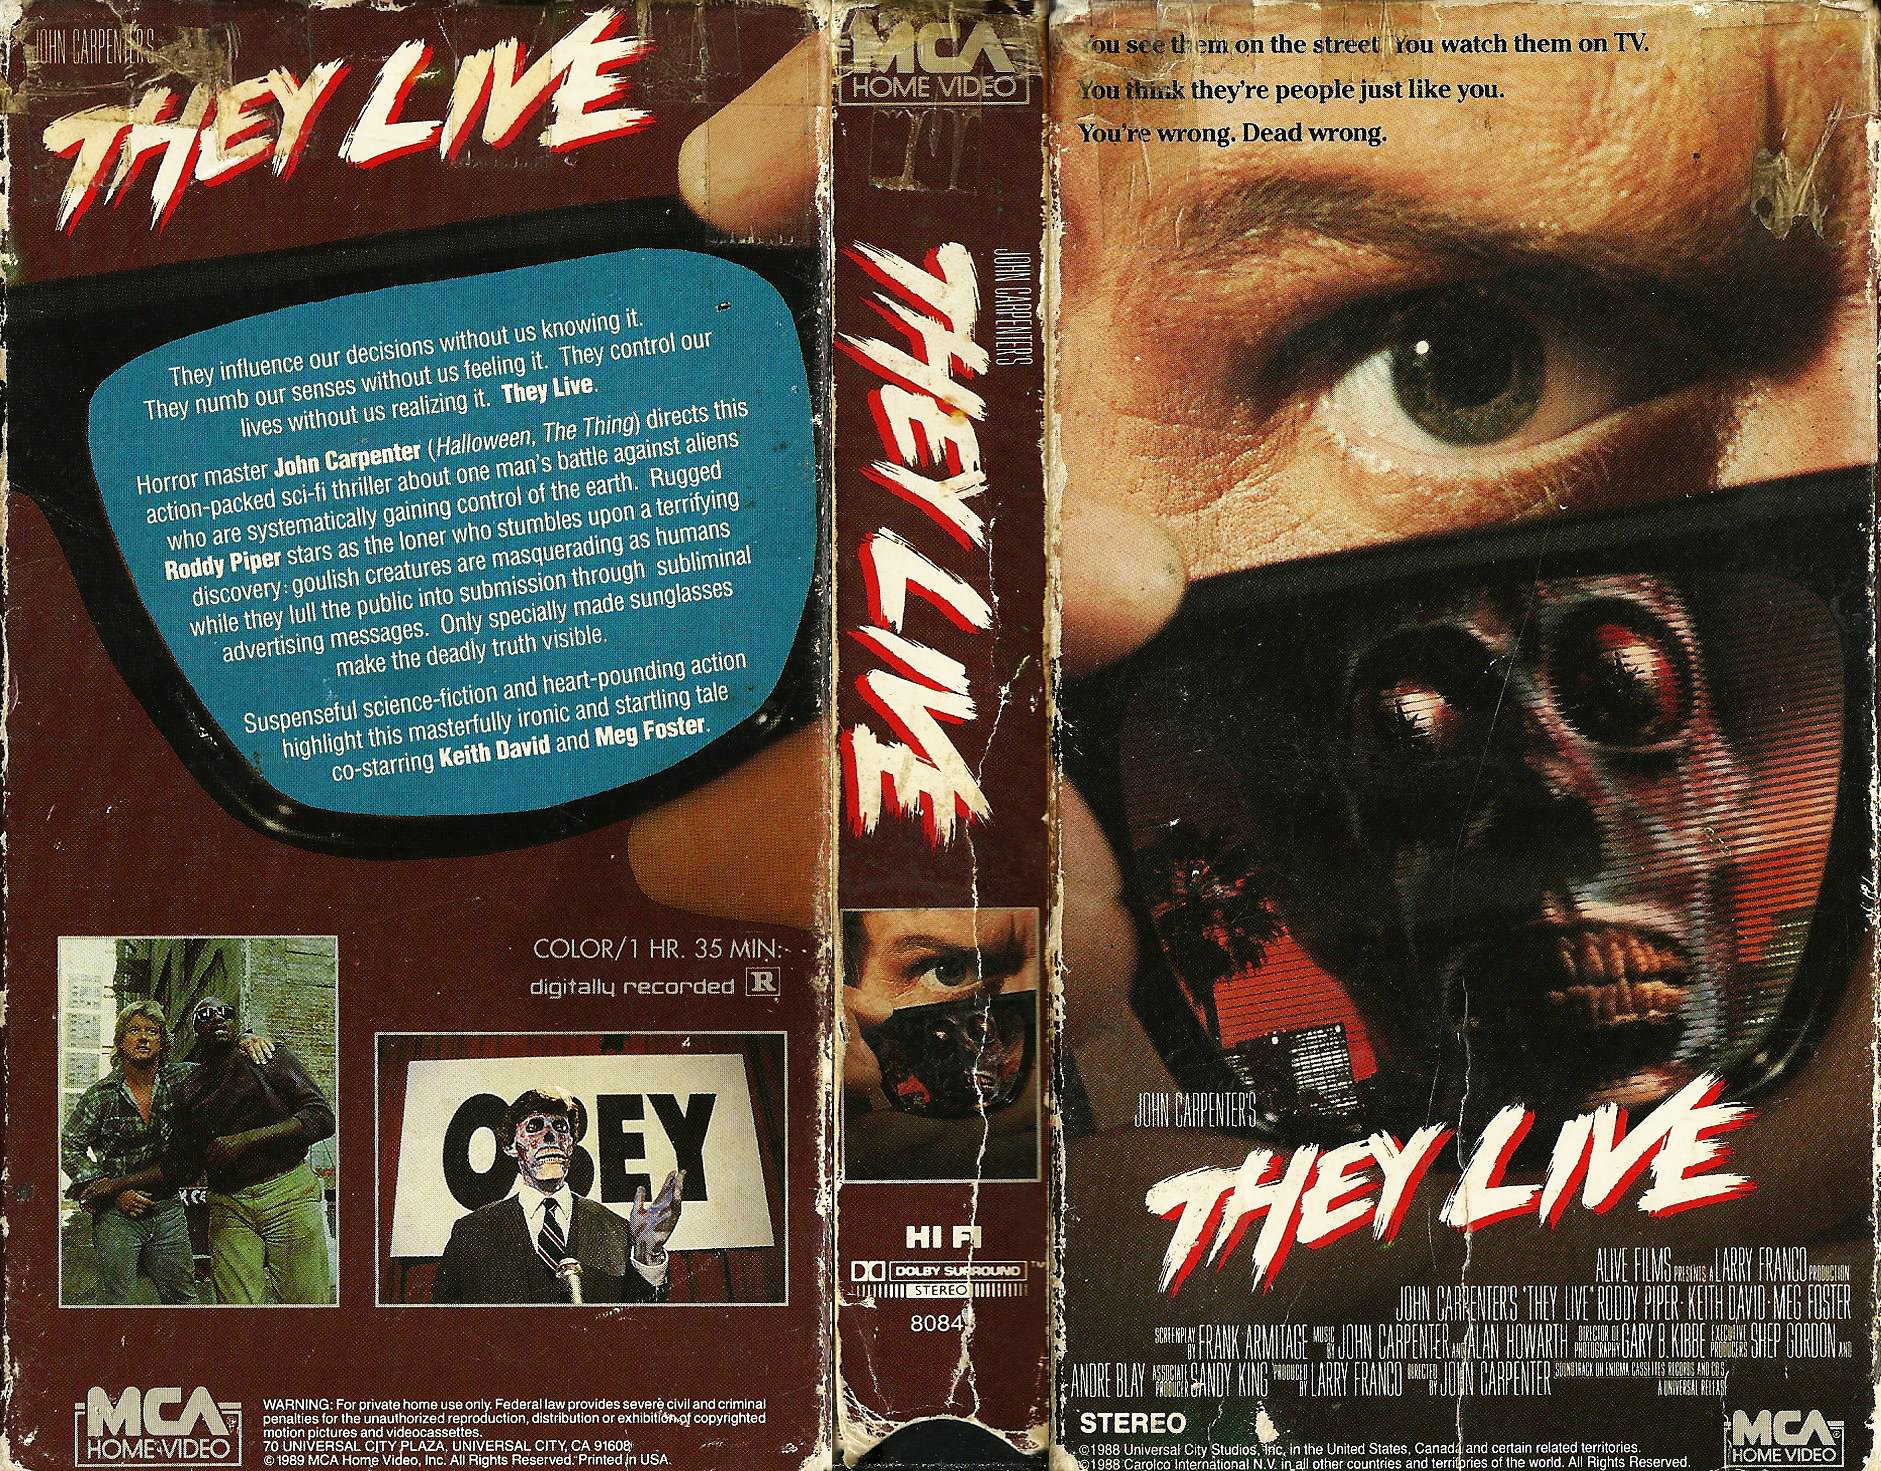 They Live 1988, directed by John Carpenter